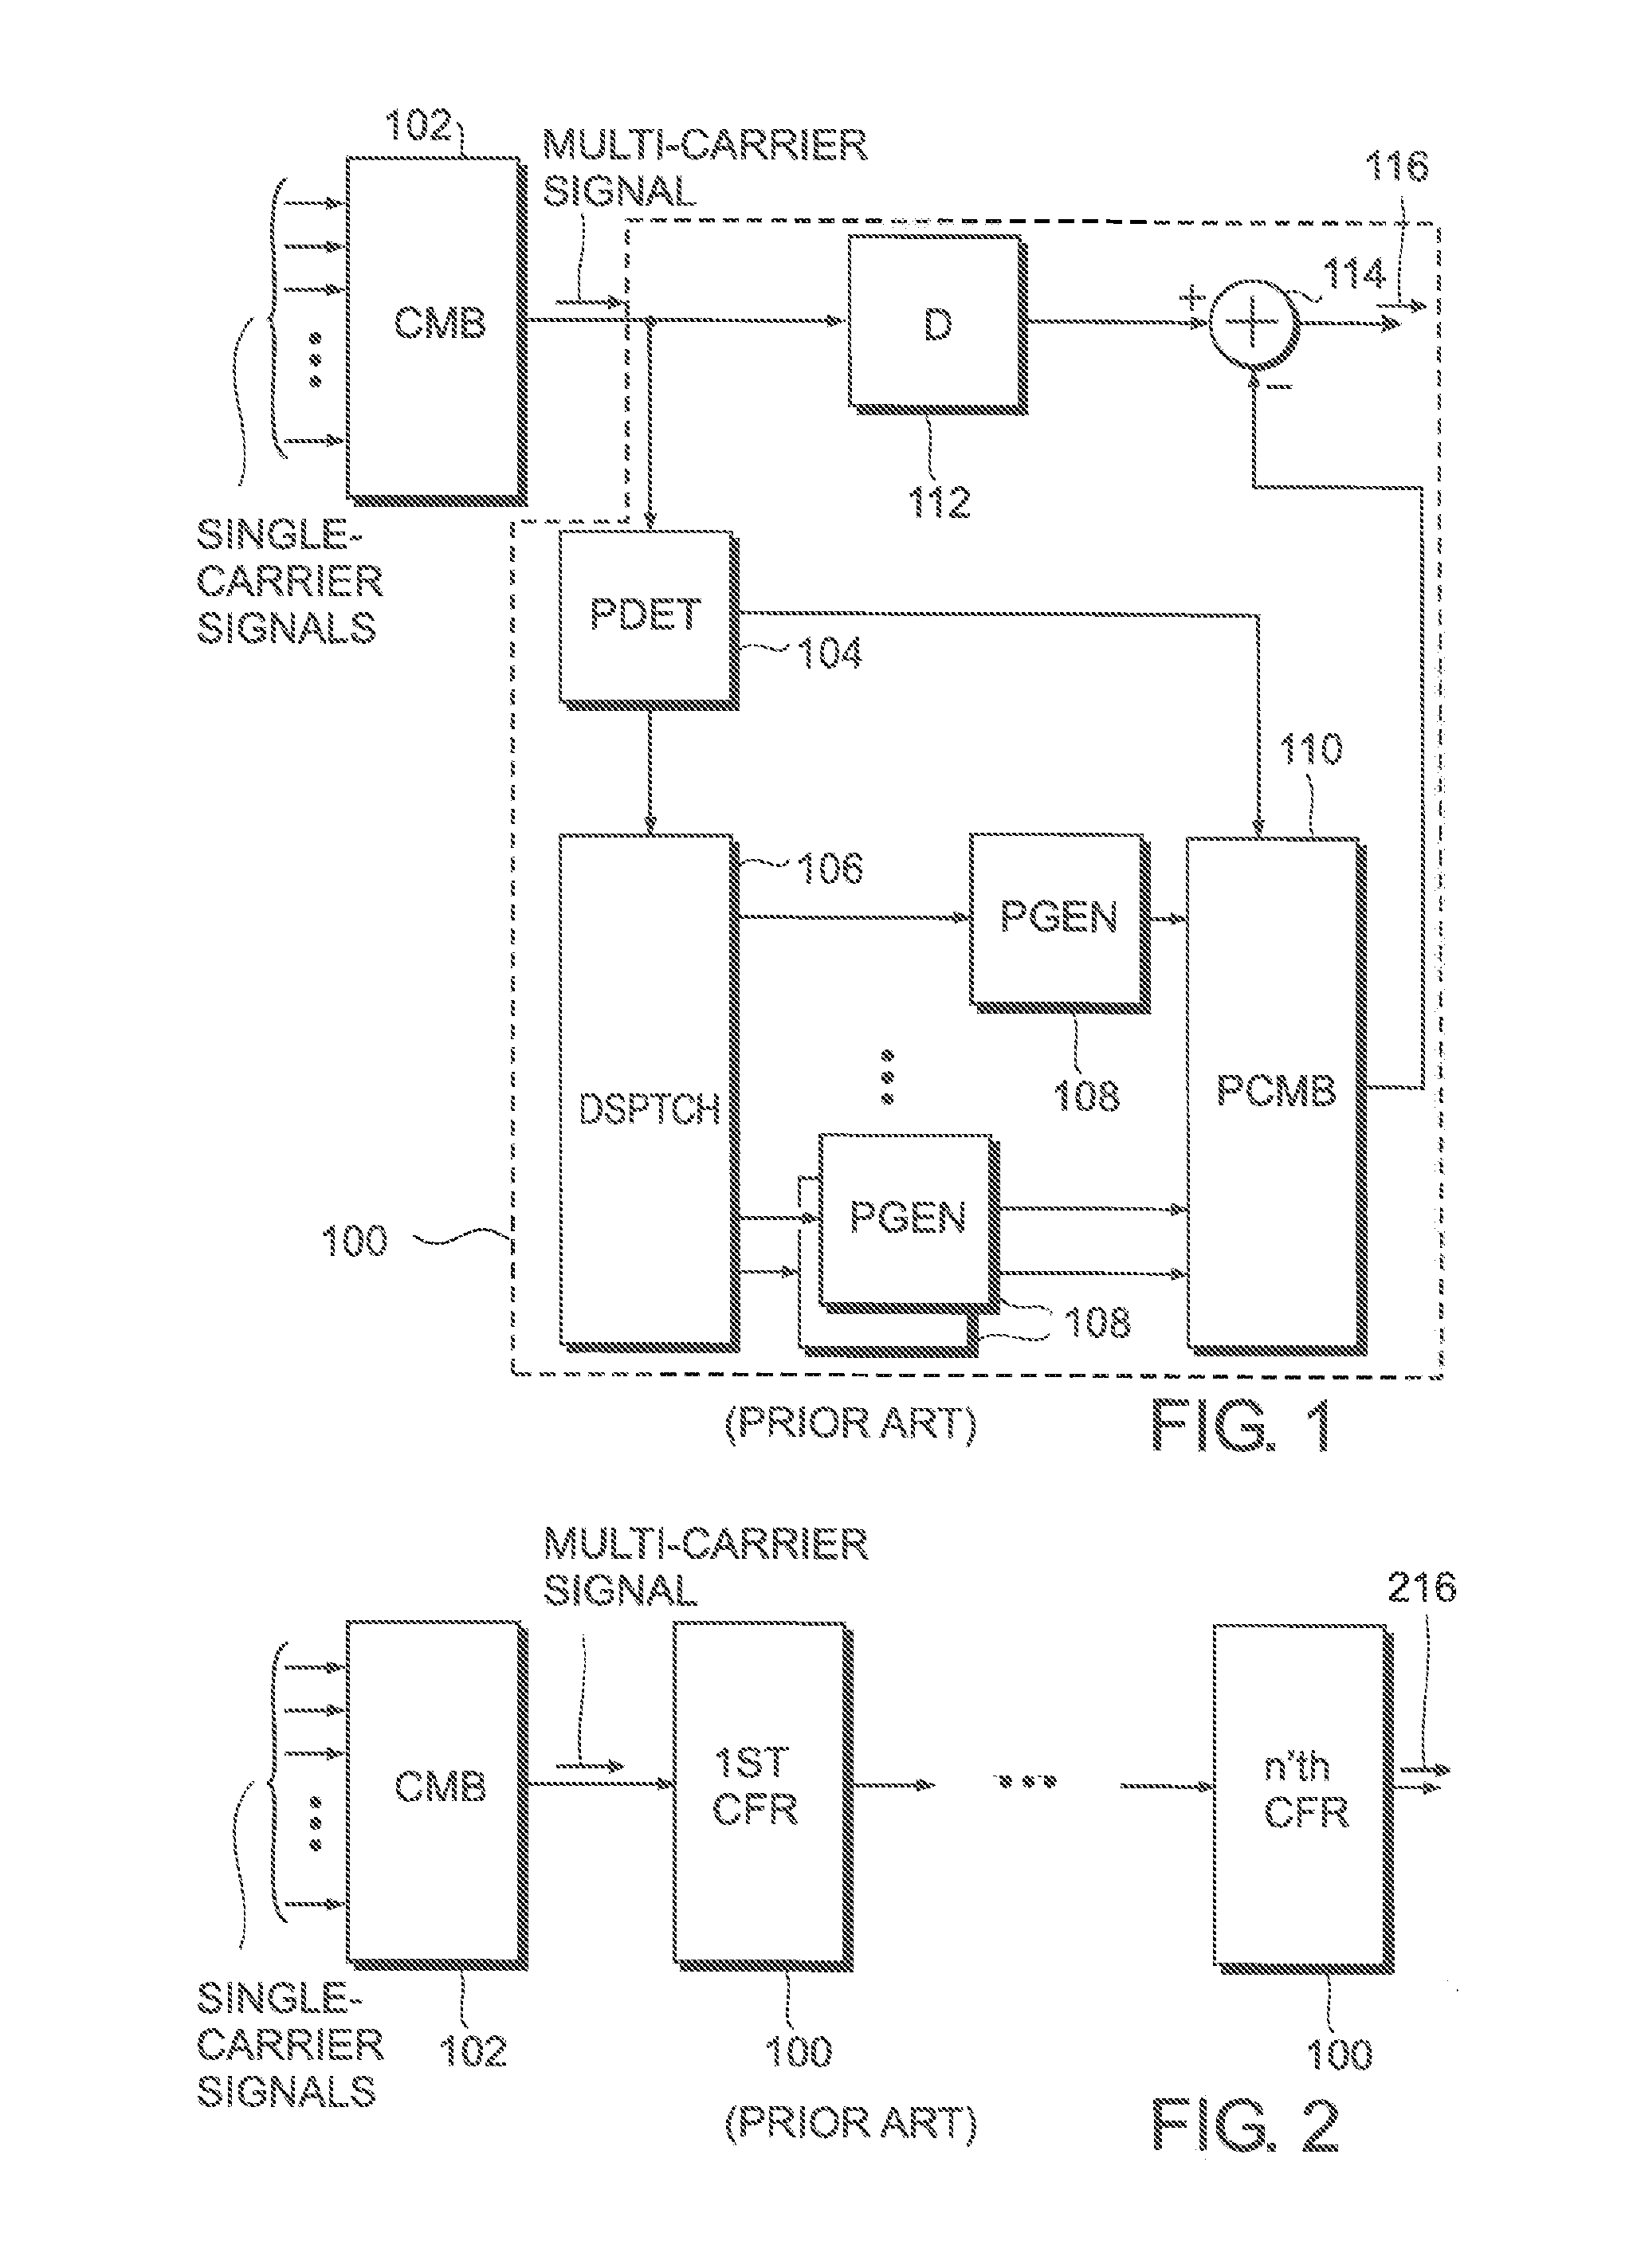 Crest factor reduction method and circuit for a multi-carrier signal